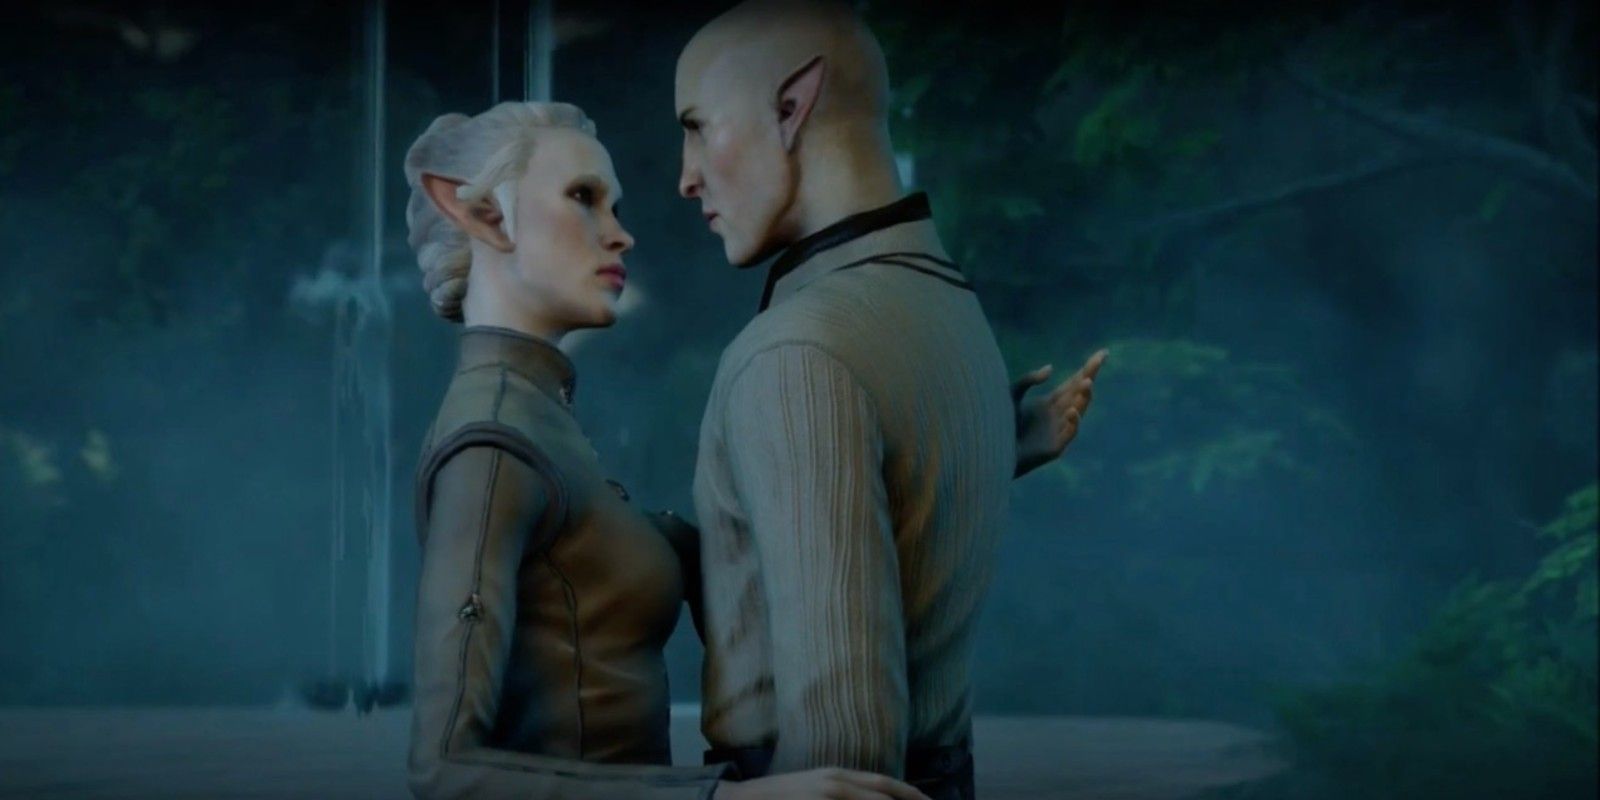 A female Elf Inquisitor reaches the romance hard lock point while in a relationship with Solas in Dragon Age: Inquisition